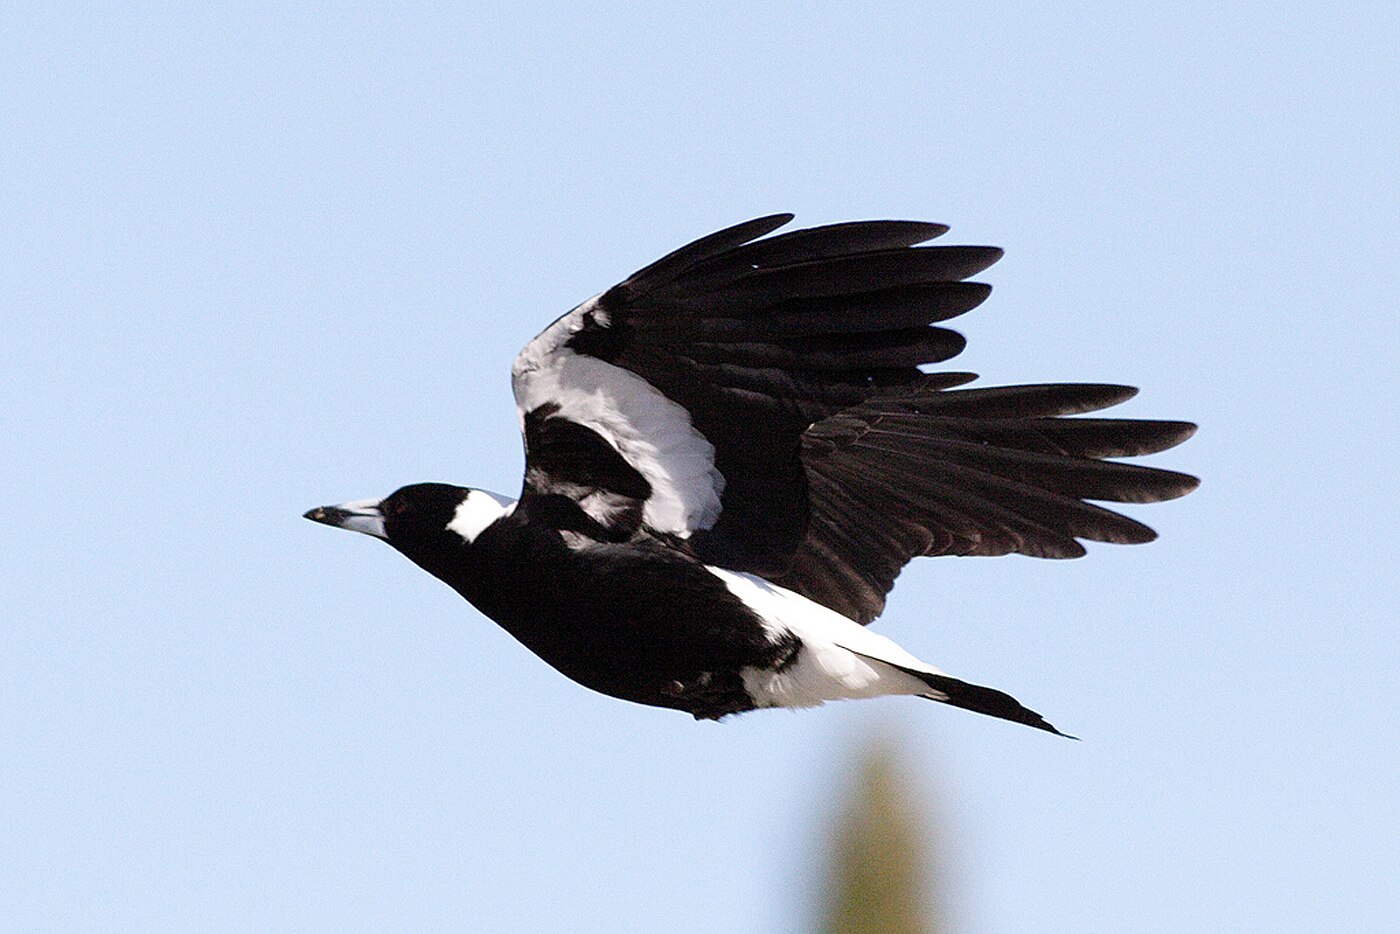 Magpies are most prone to swooping during the August to October period. 